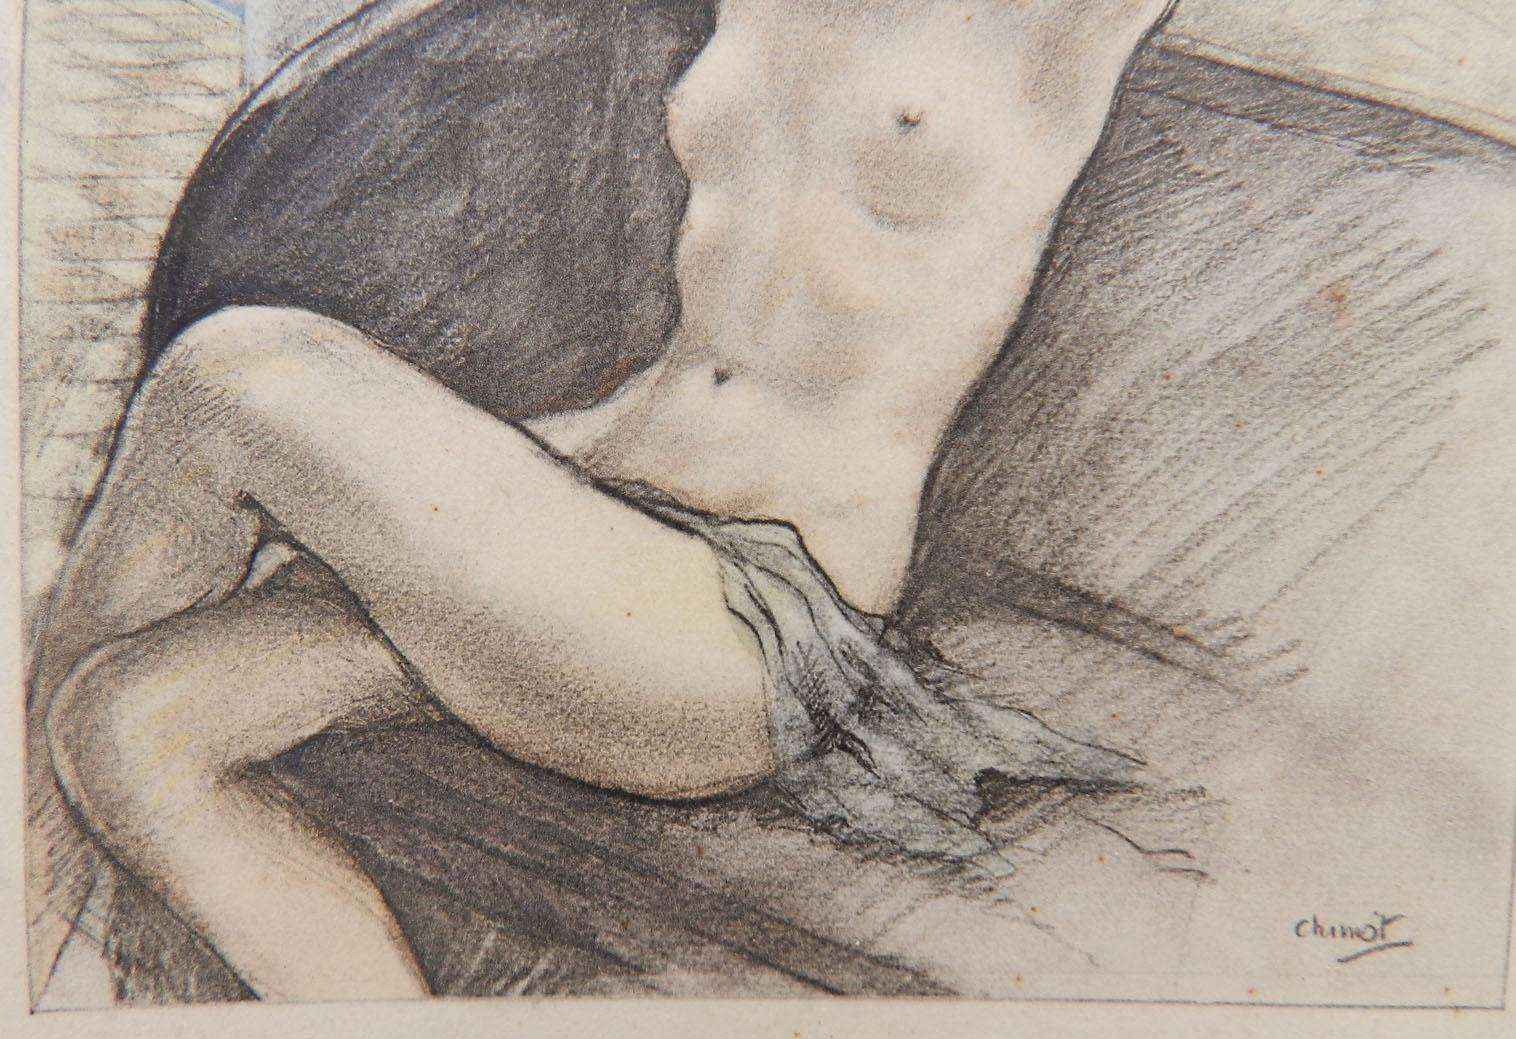 Nude Lithograph Print by Edouard Chomet c1936 Art Deco Erotica 
Signed in the plate
From the well known printer to Artists of the era Emile Chamontin Paris with original stamp on the back
Unframed on paper
Actual image measures 11.25cms 4.43ins high